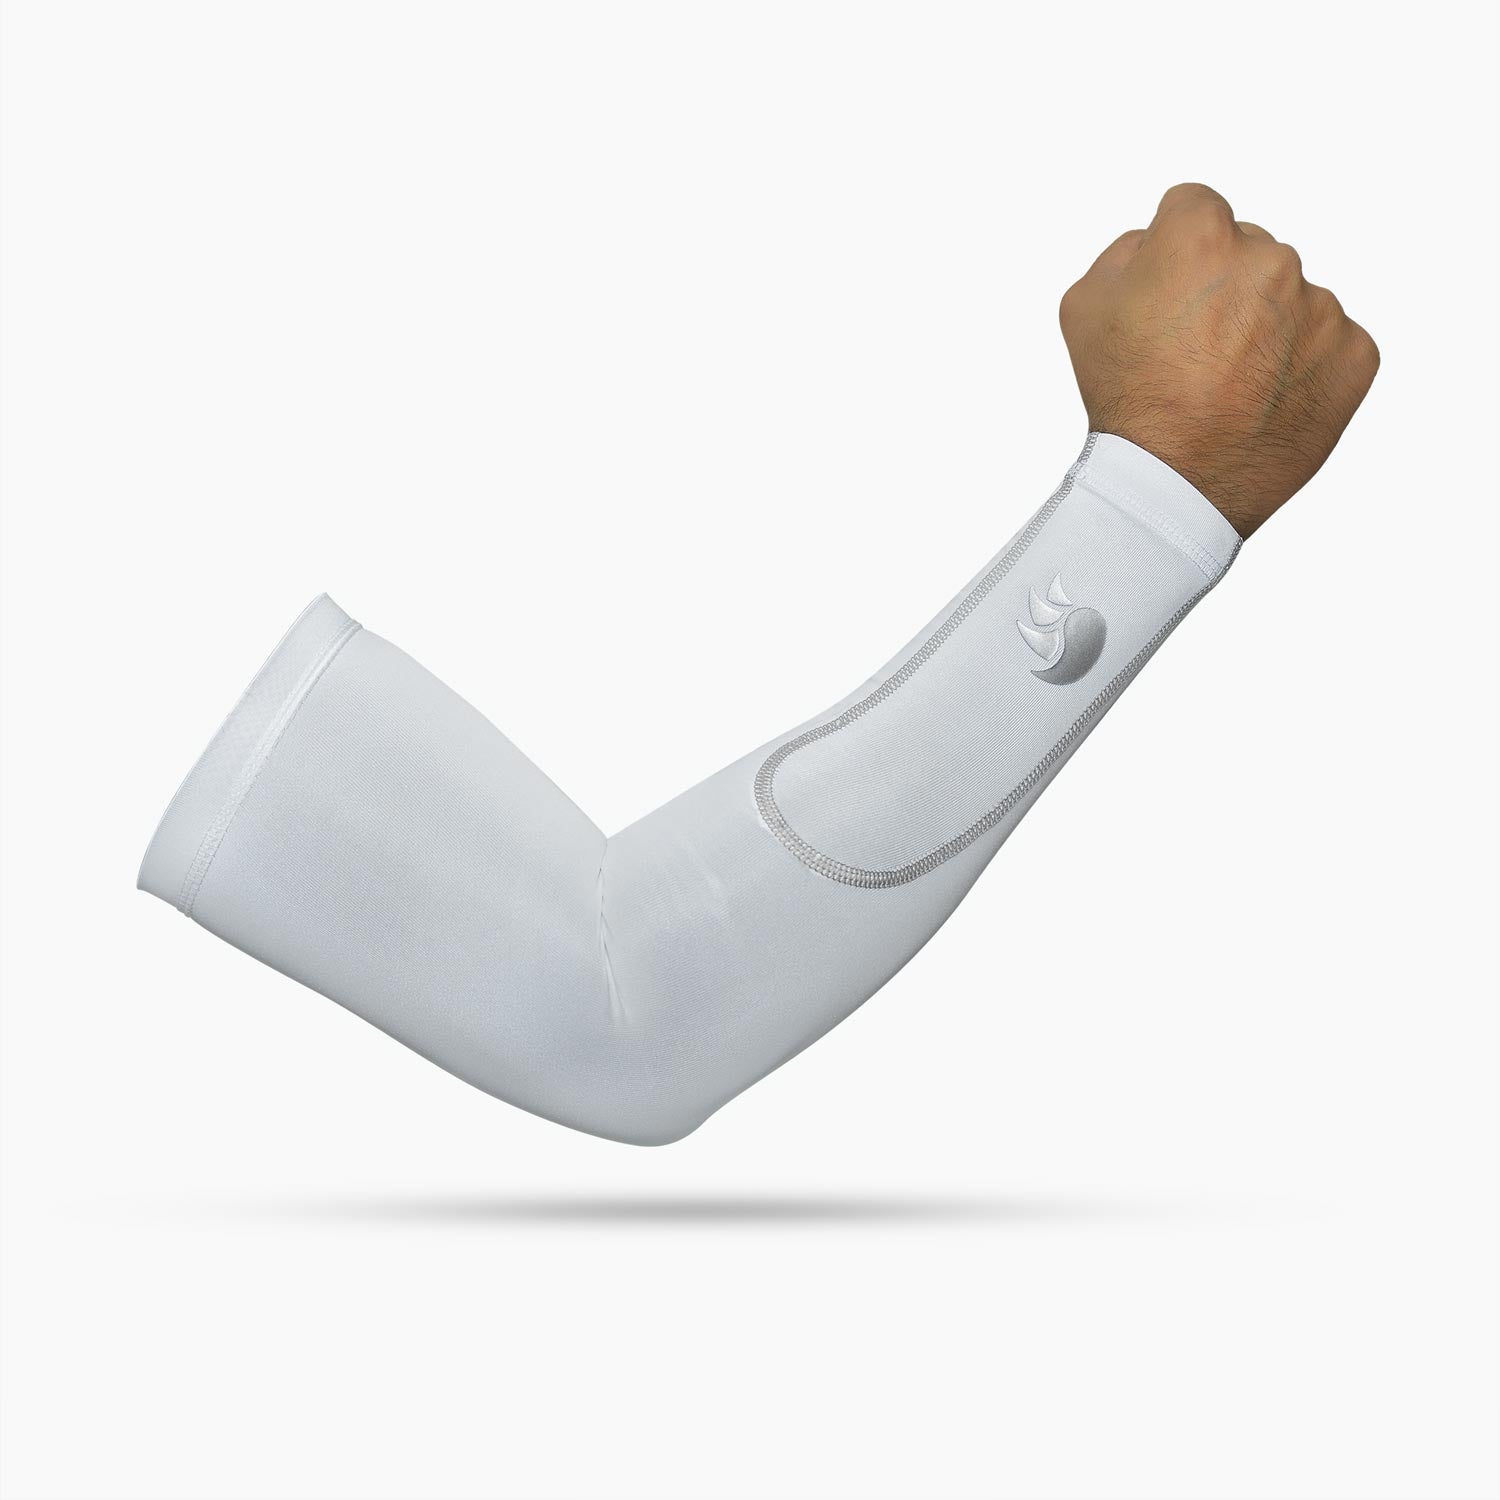 DSC WHITE ARM SLEEVES COMPRESSION